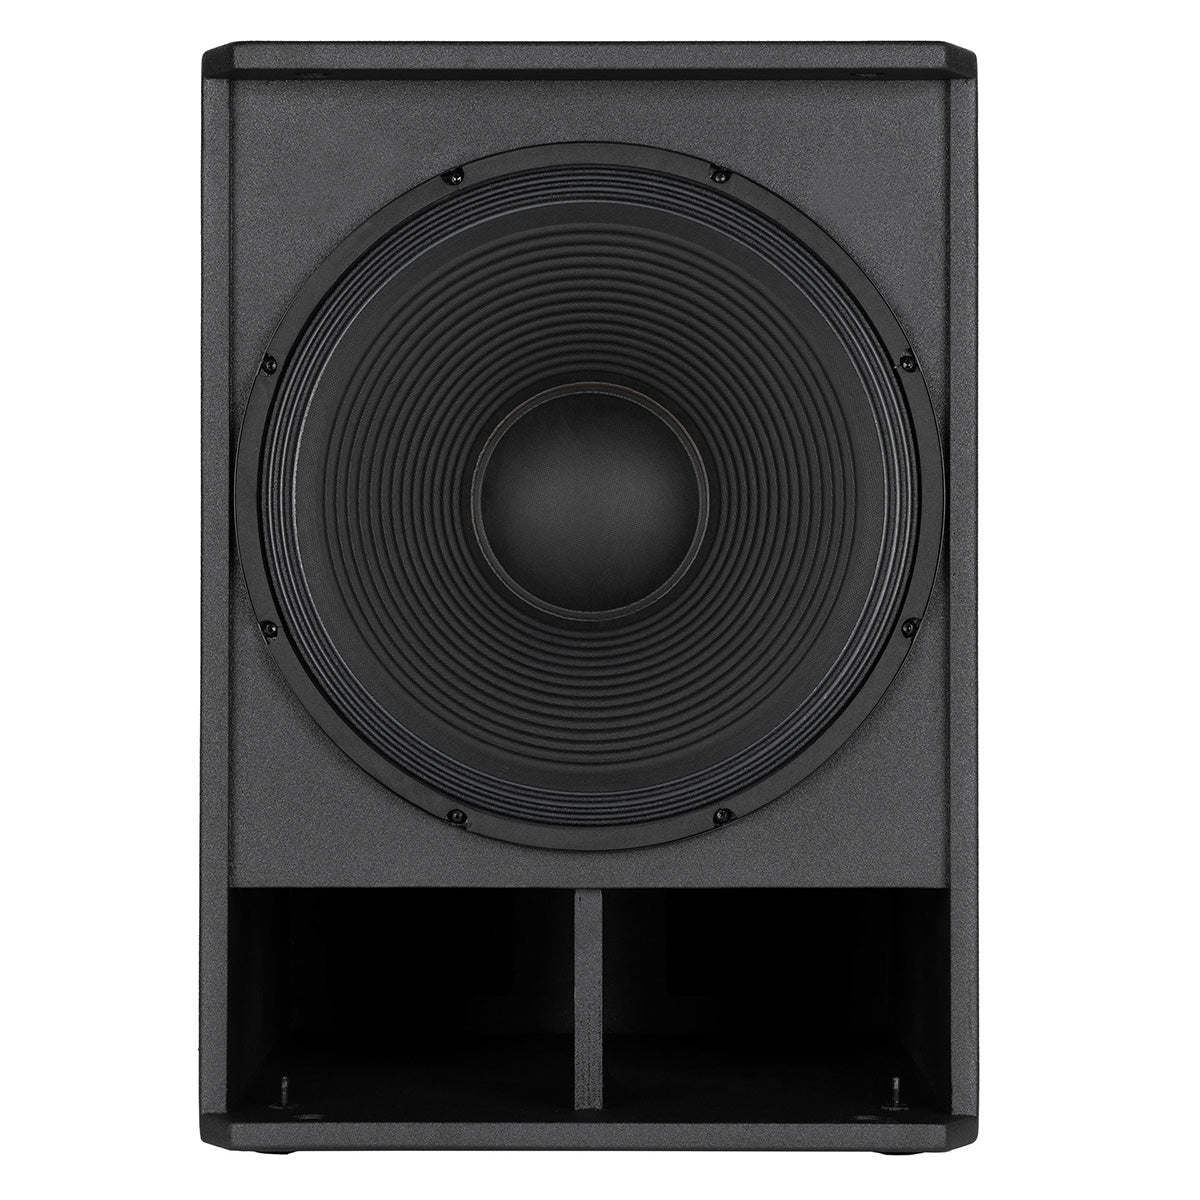 RCF SUB 905-AS MK3 15" Active Subwoofer